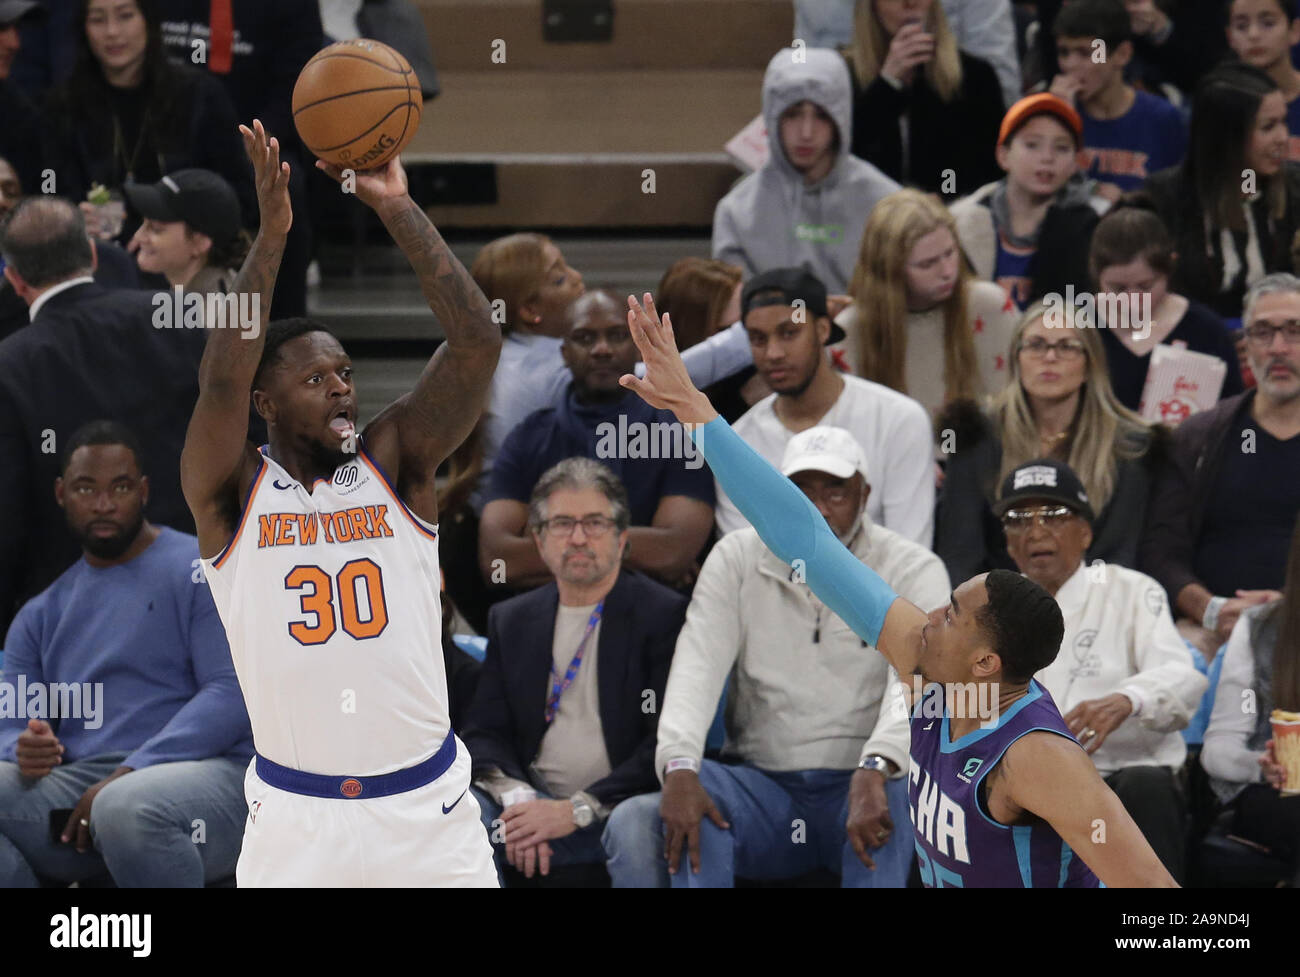 New York, United States. 16th Nov, 2019. New York Knicks Julius Randle shoots a jump shot in the first half against the Charlotte Hornets at Madison Square Garden in New York City on Saturday, November 16, 2019. Photo by John Angelillo/UPI Credit: UPI/Alamy Live News Stock Photo